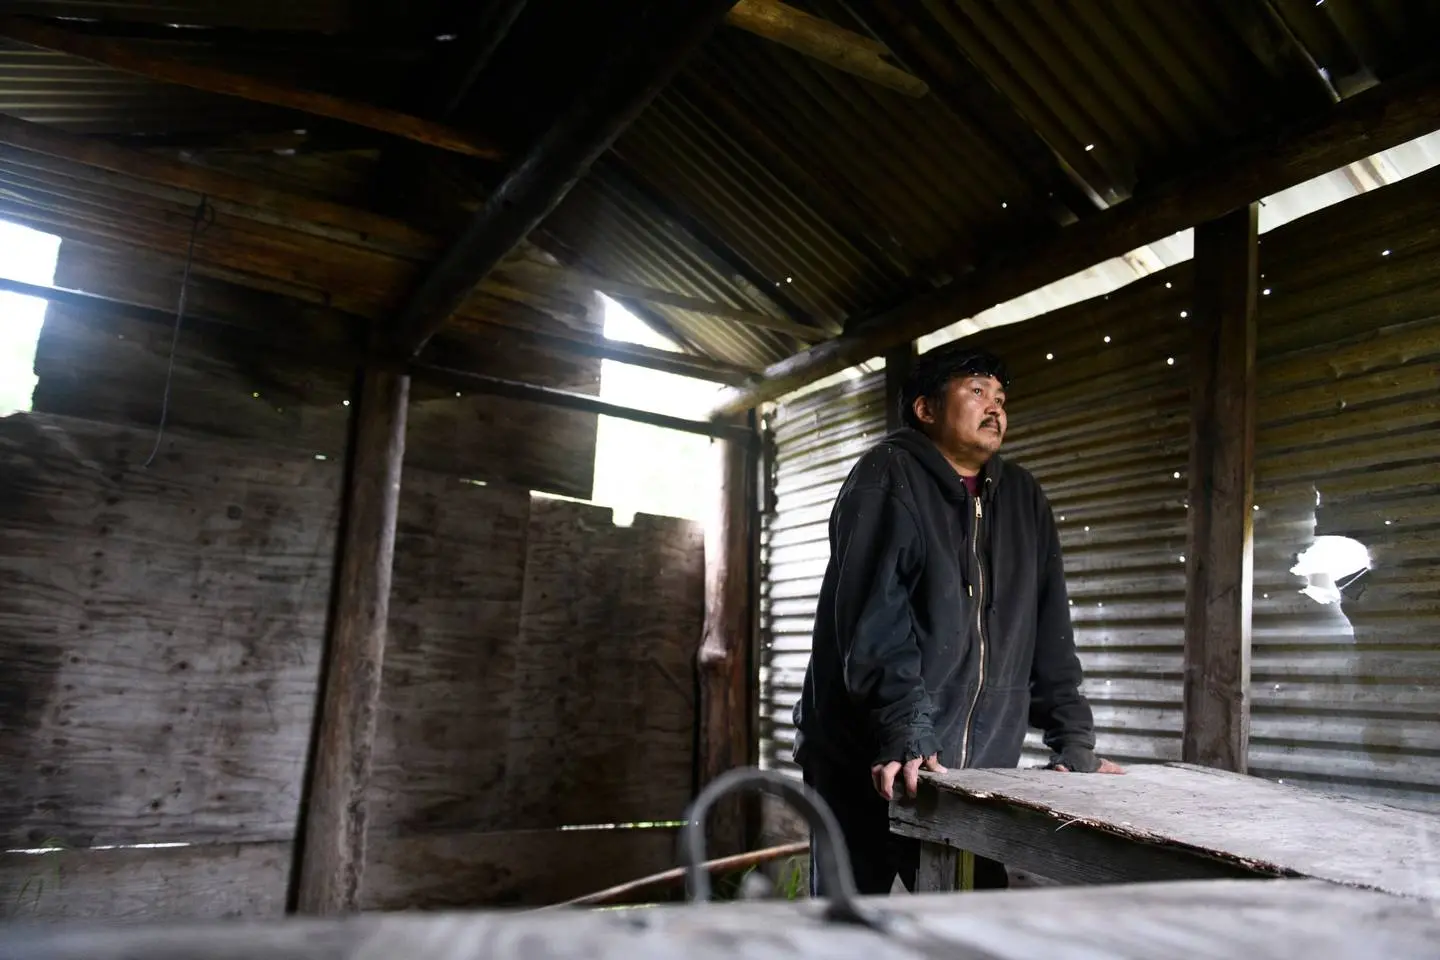 Louis Immamak, standing in his empty smokehouse in Emmonak